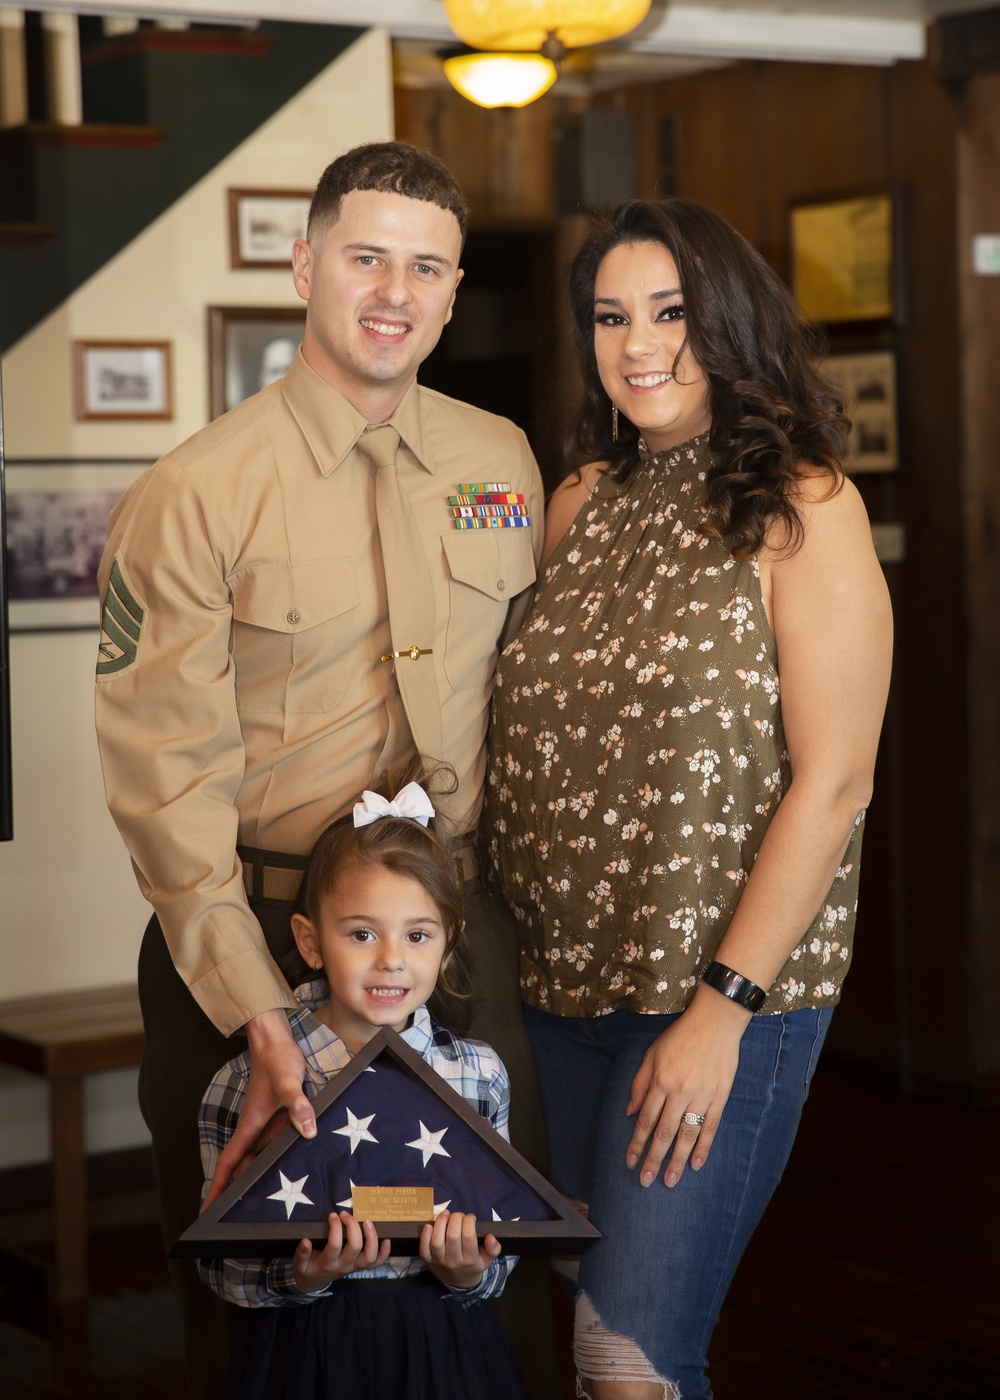 2nd MAW Marine named Service Person of the Quarter